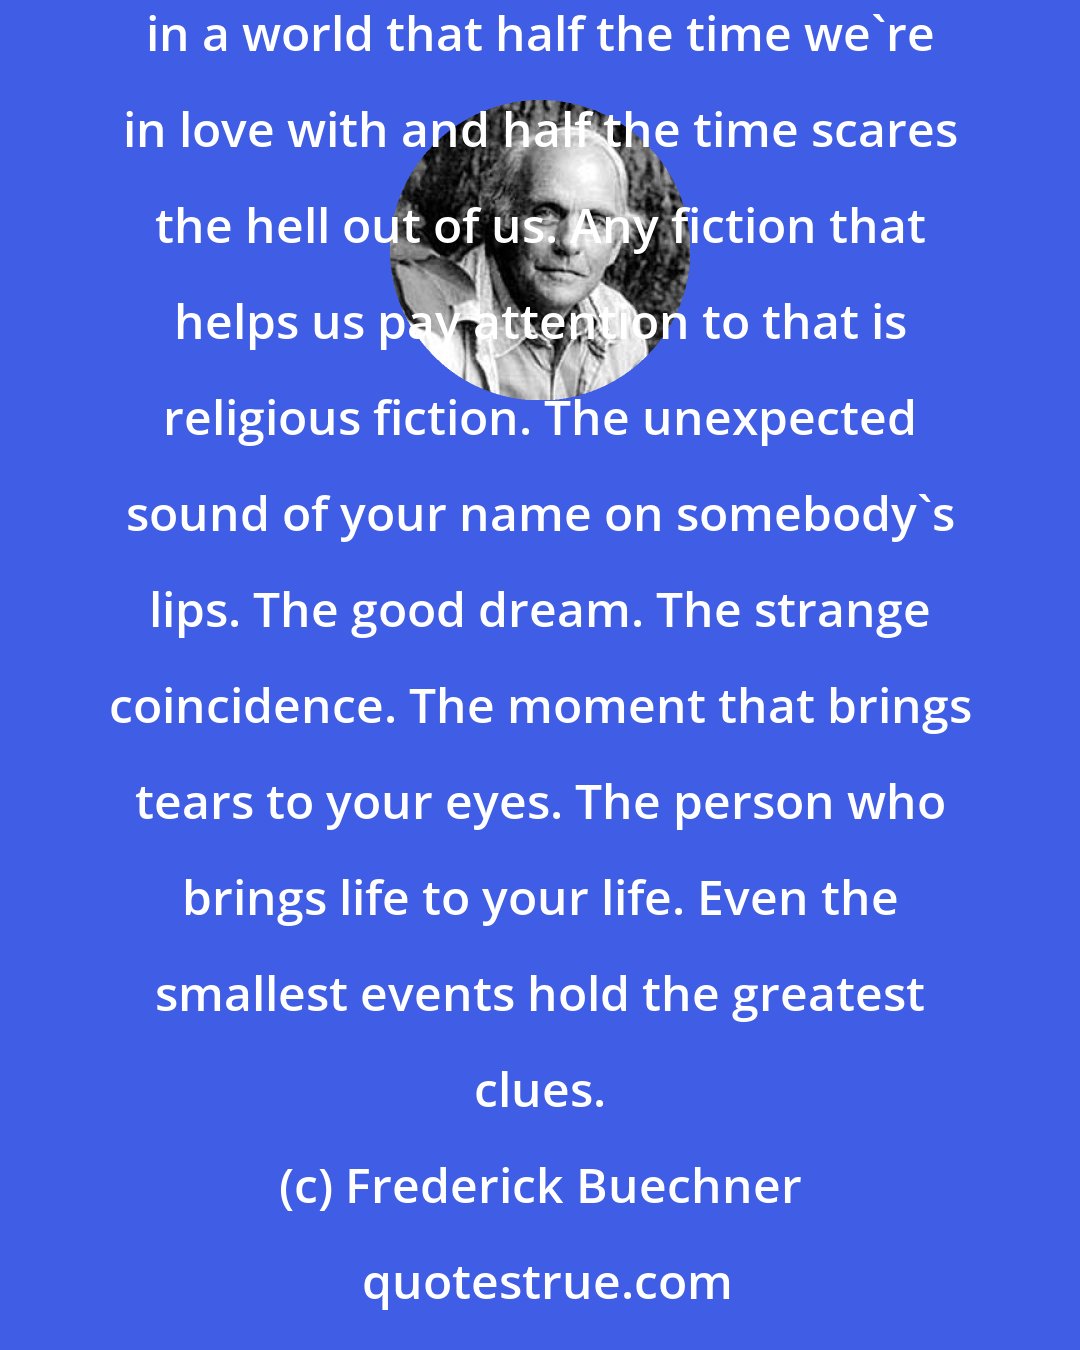 Frederick Buechner: Maybe it's all utterly meaningless. Maybe it's all unutterably meaningful. If you want to know which, pay attention to what it means to be truly human in a world that half the time we're in love with and half the time scares the hell out of us. Any fiction that helps us pay attention to that is religious fiction. The unexpected sound of your name on somebody's lips. The good dream. The strange coincidence. The moment that brings tears to your eyes. The person who brings life to your life. Even the smallest events hold the greatest clues.